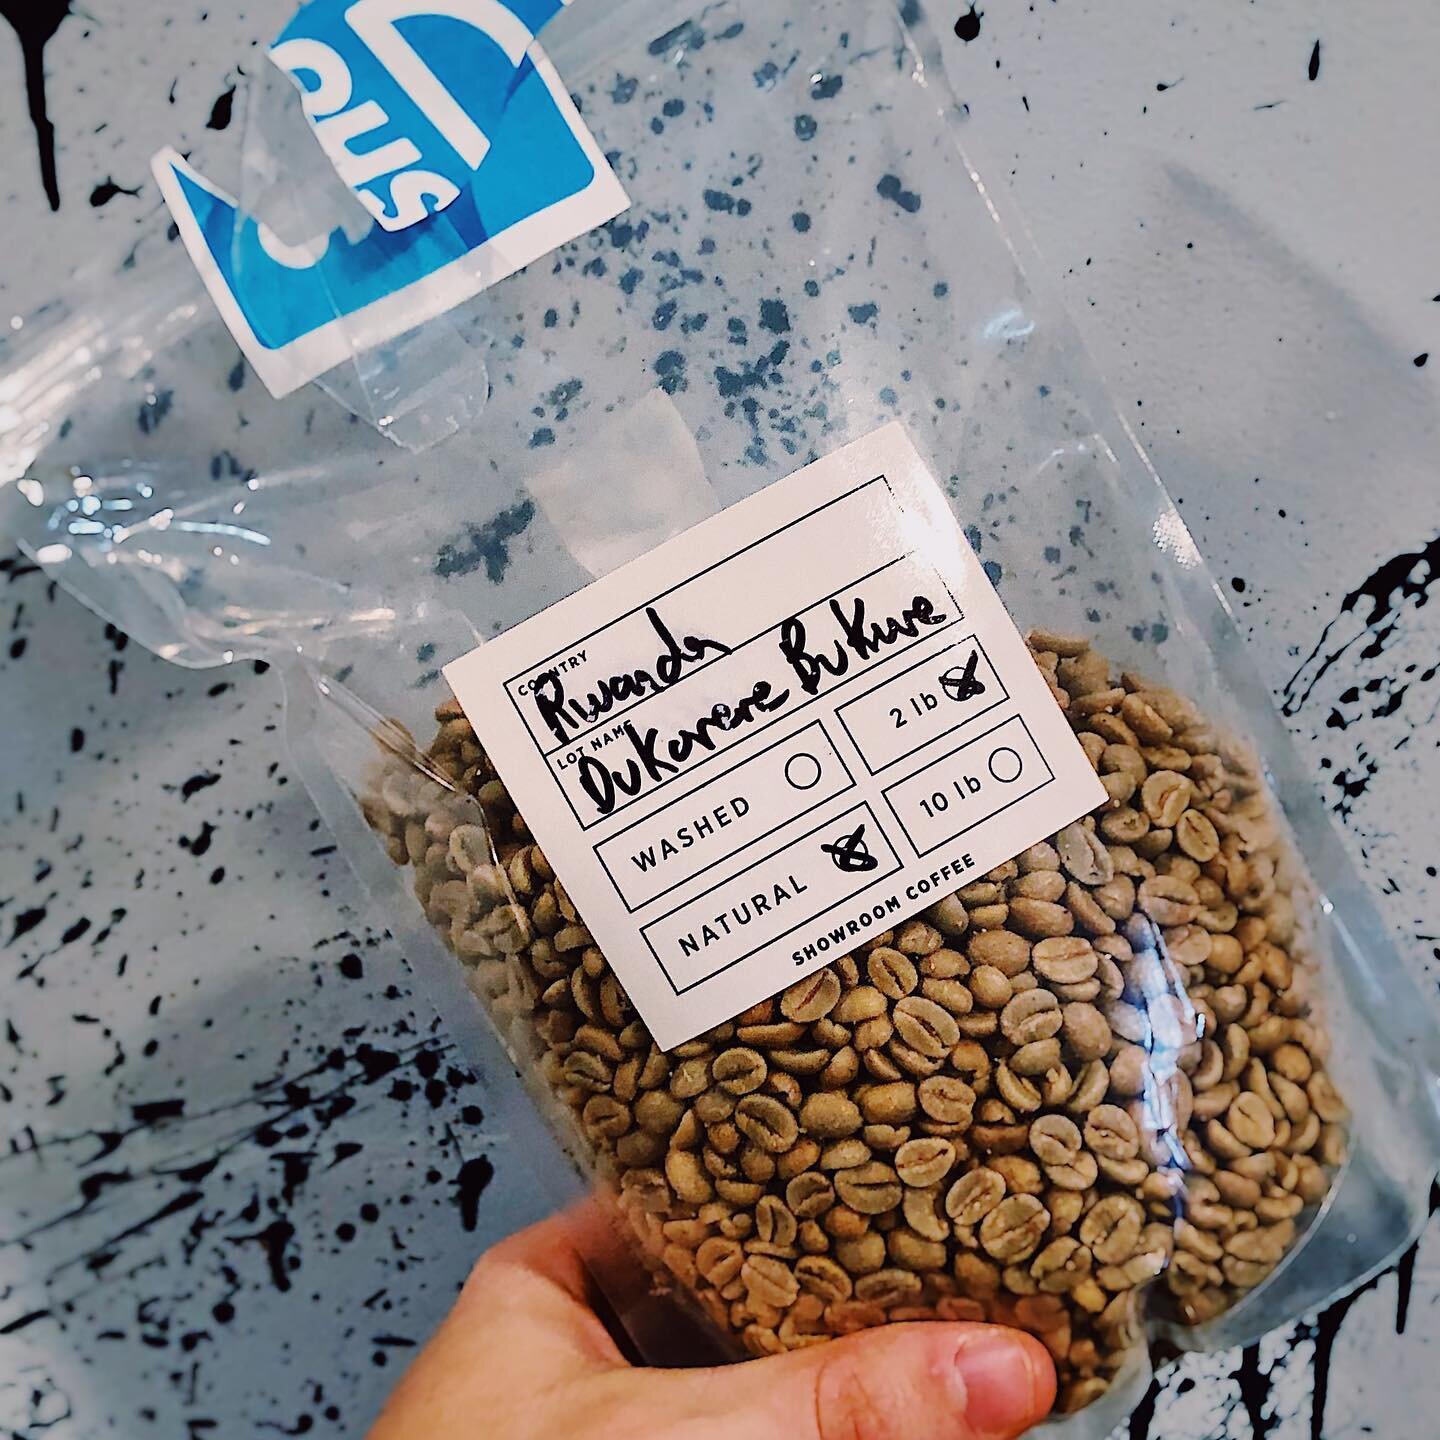 New coffee incoming! Sweet strawberry, tart lime, and a beautiful black tea ending...the perfect coffee to transport you back to warmer temperatures. Check it out in the store! @ awakenroasting.com 

#awakencoffeeroasters 
#specialtycoffee 
#thirdwav